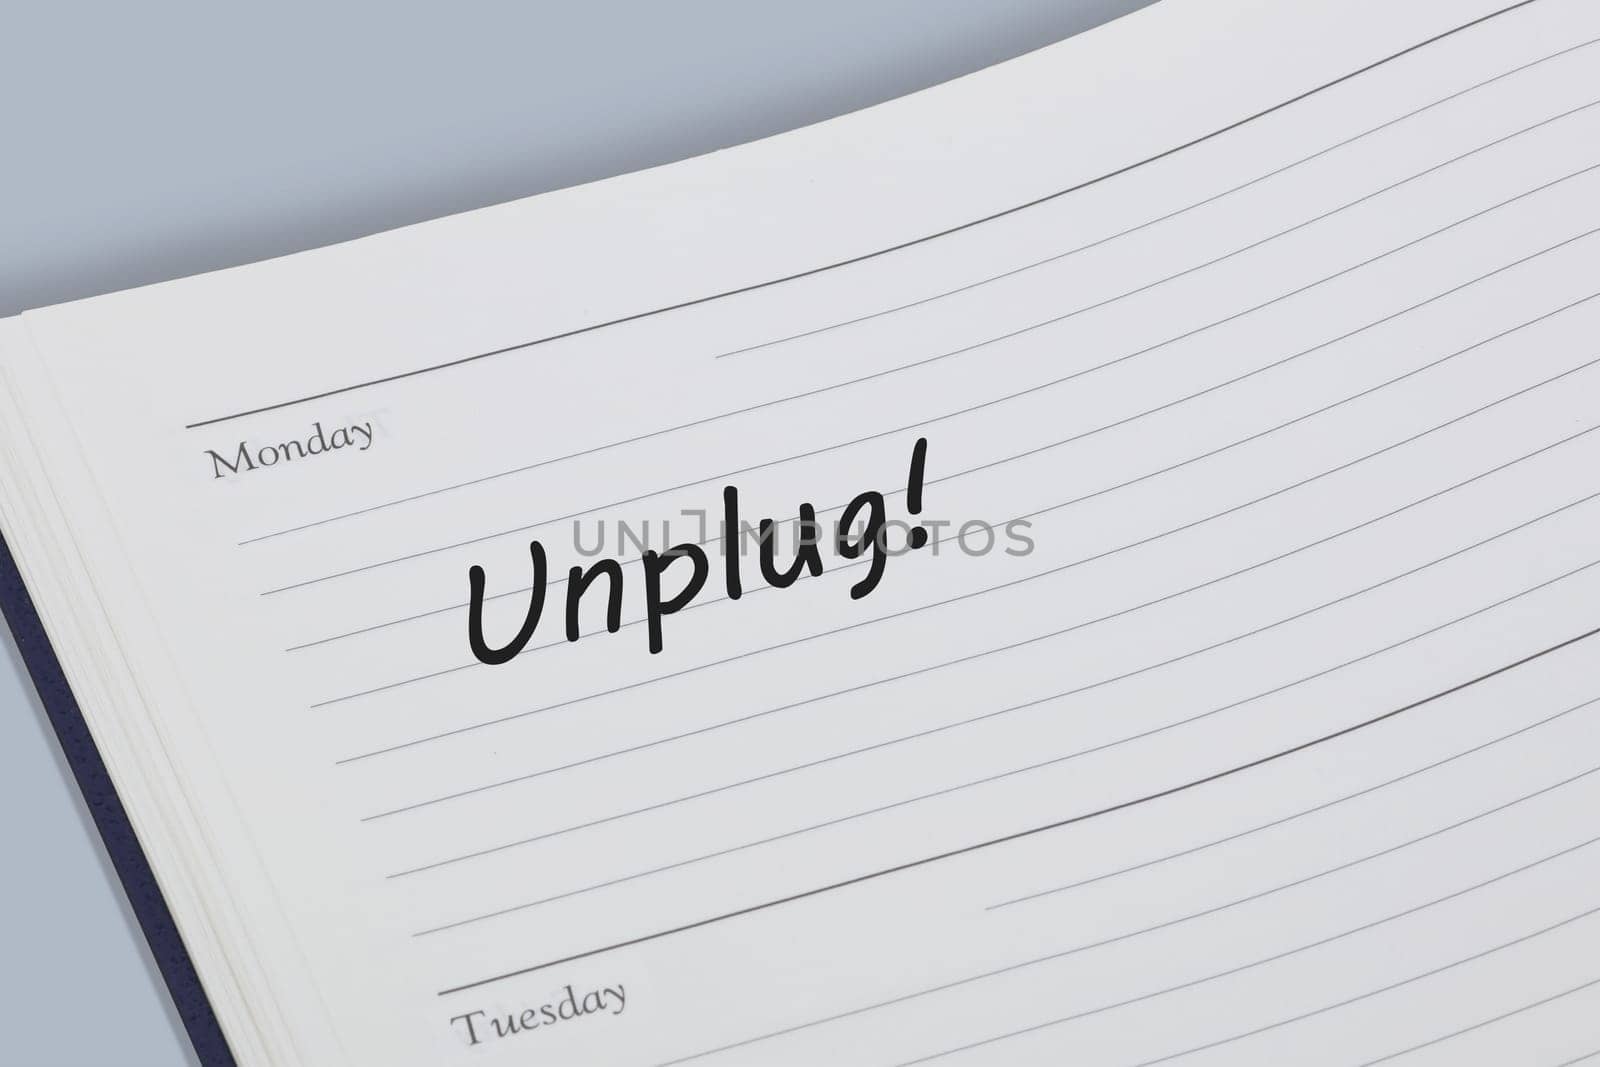 An Unplug reminder message in an open diary